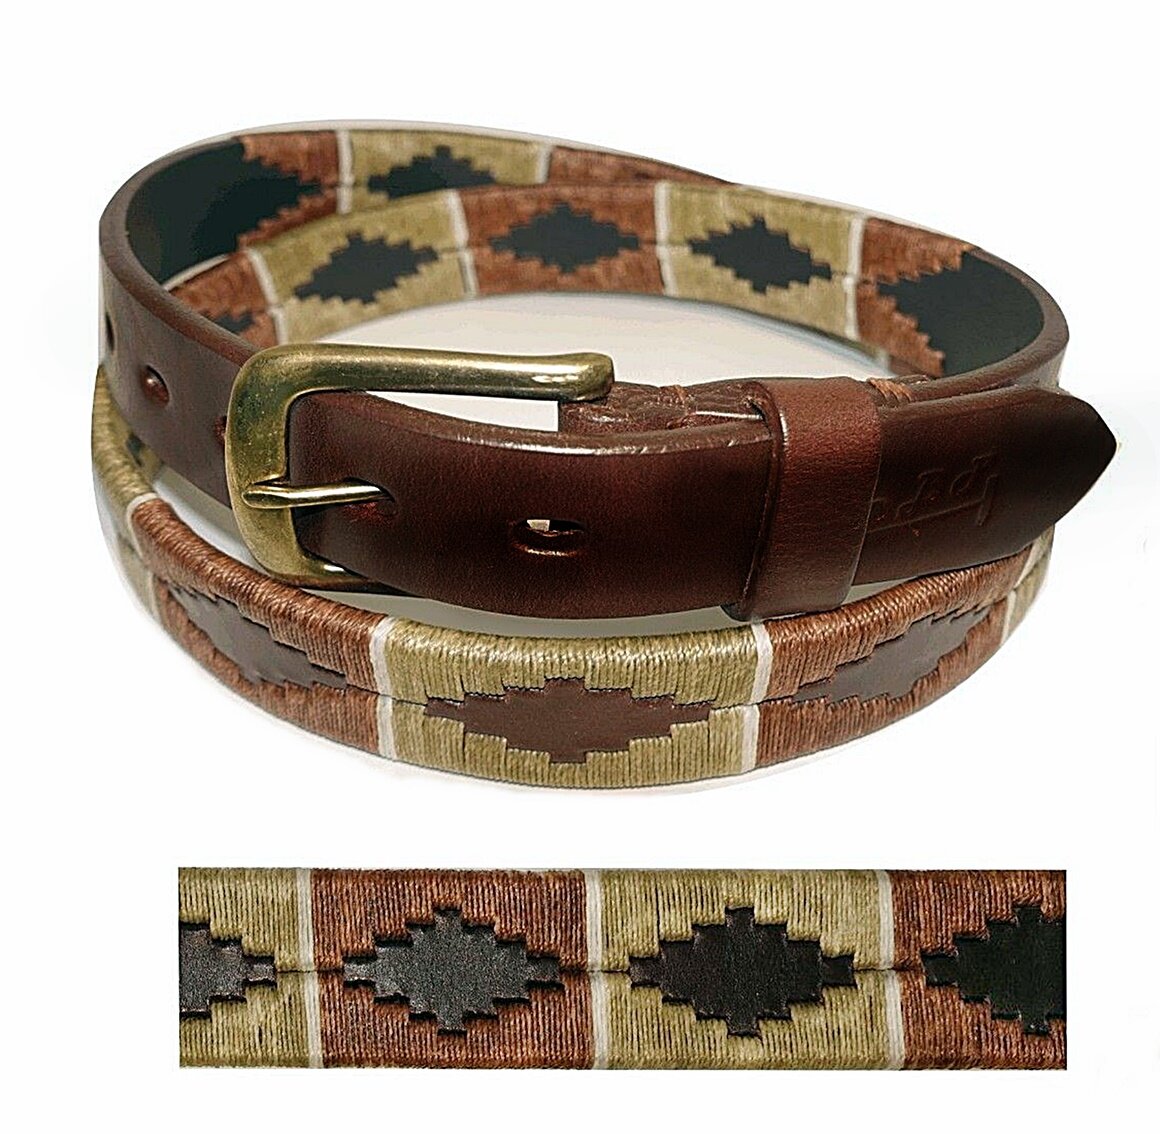 "Argentina" Polo Belt Brown 100% Argentine Embroidered Leather 